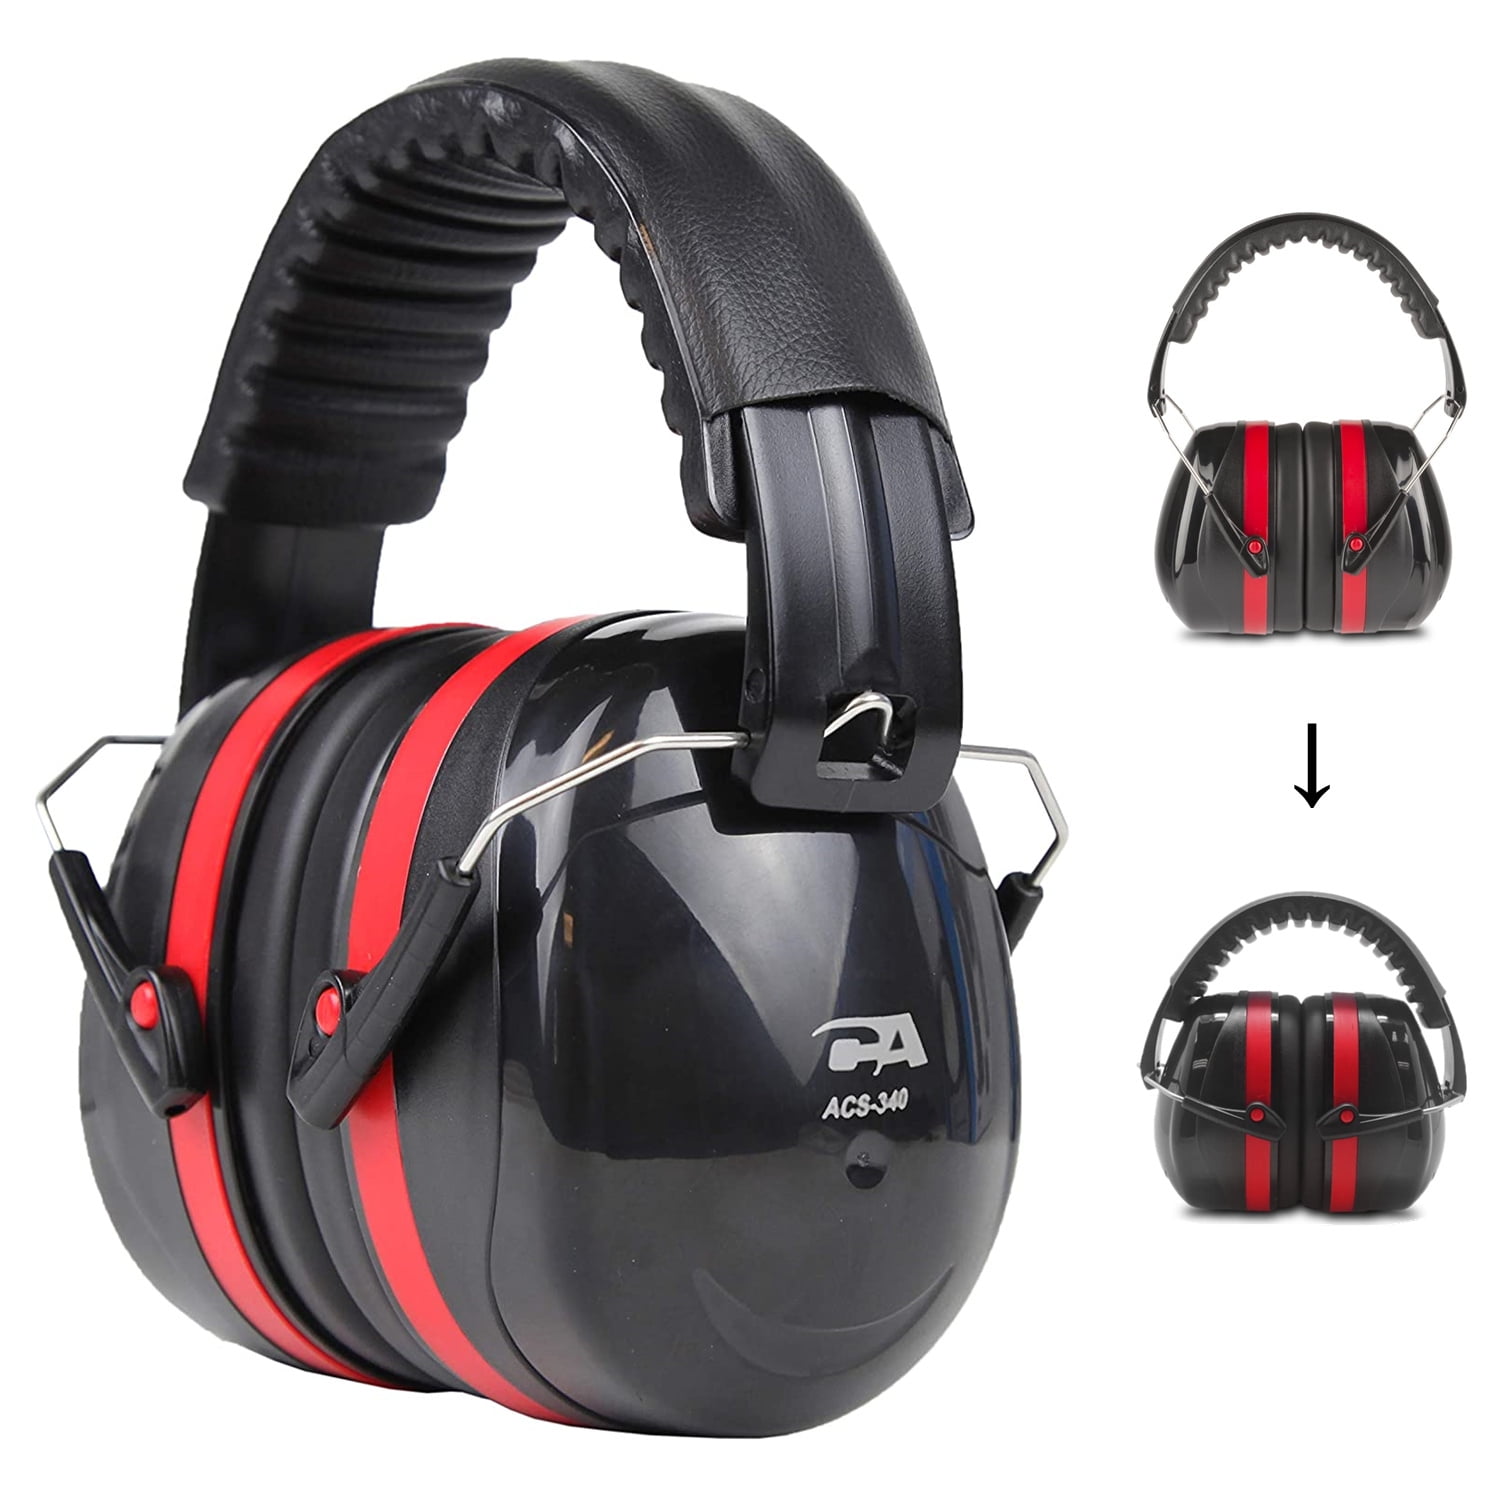 Protective Soundproof Earmuffs Anti-noise For Sports Shooting Sleeping St DqSJU 